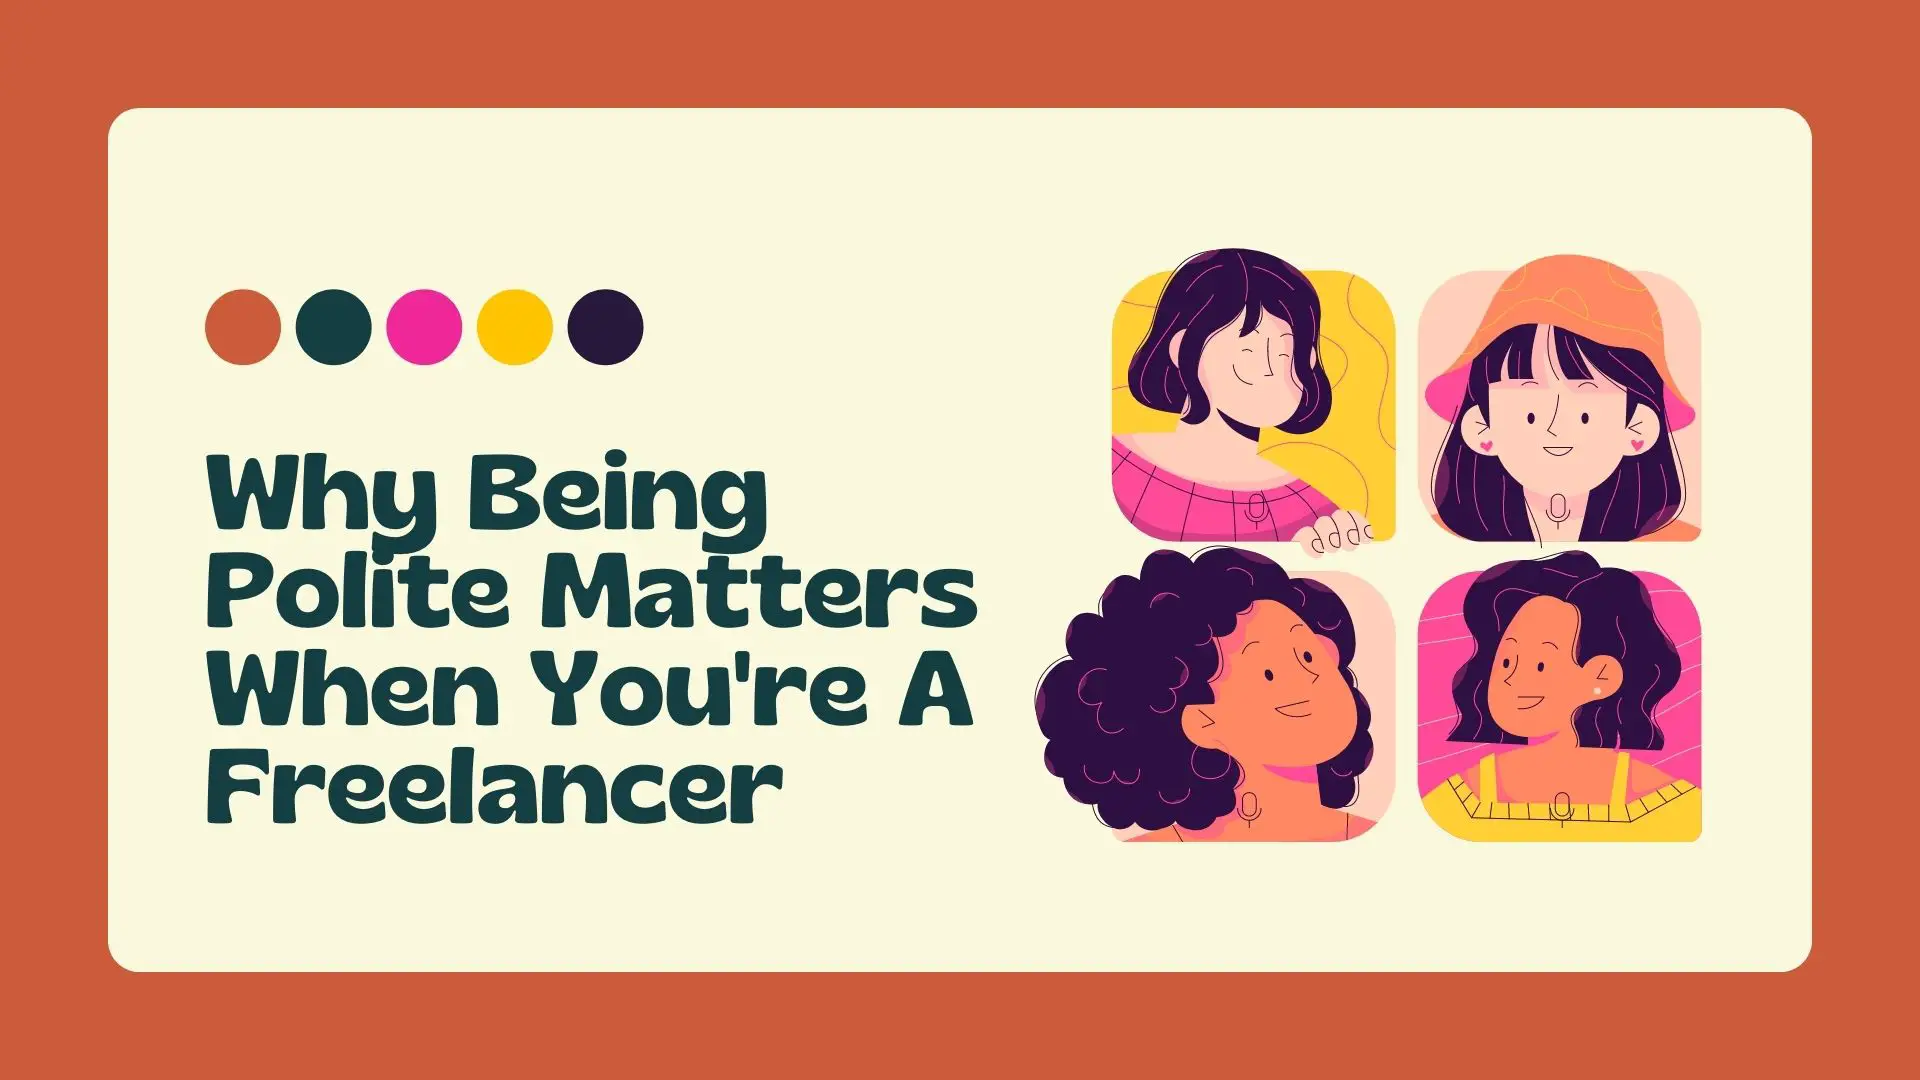 Why Being Polite Matters When You're A Freelancer